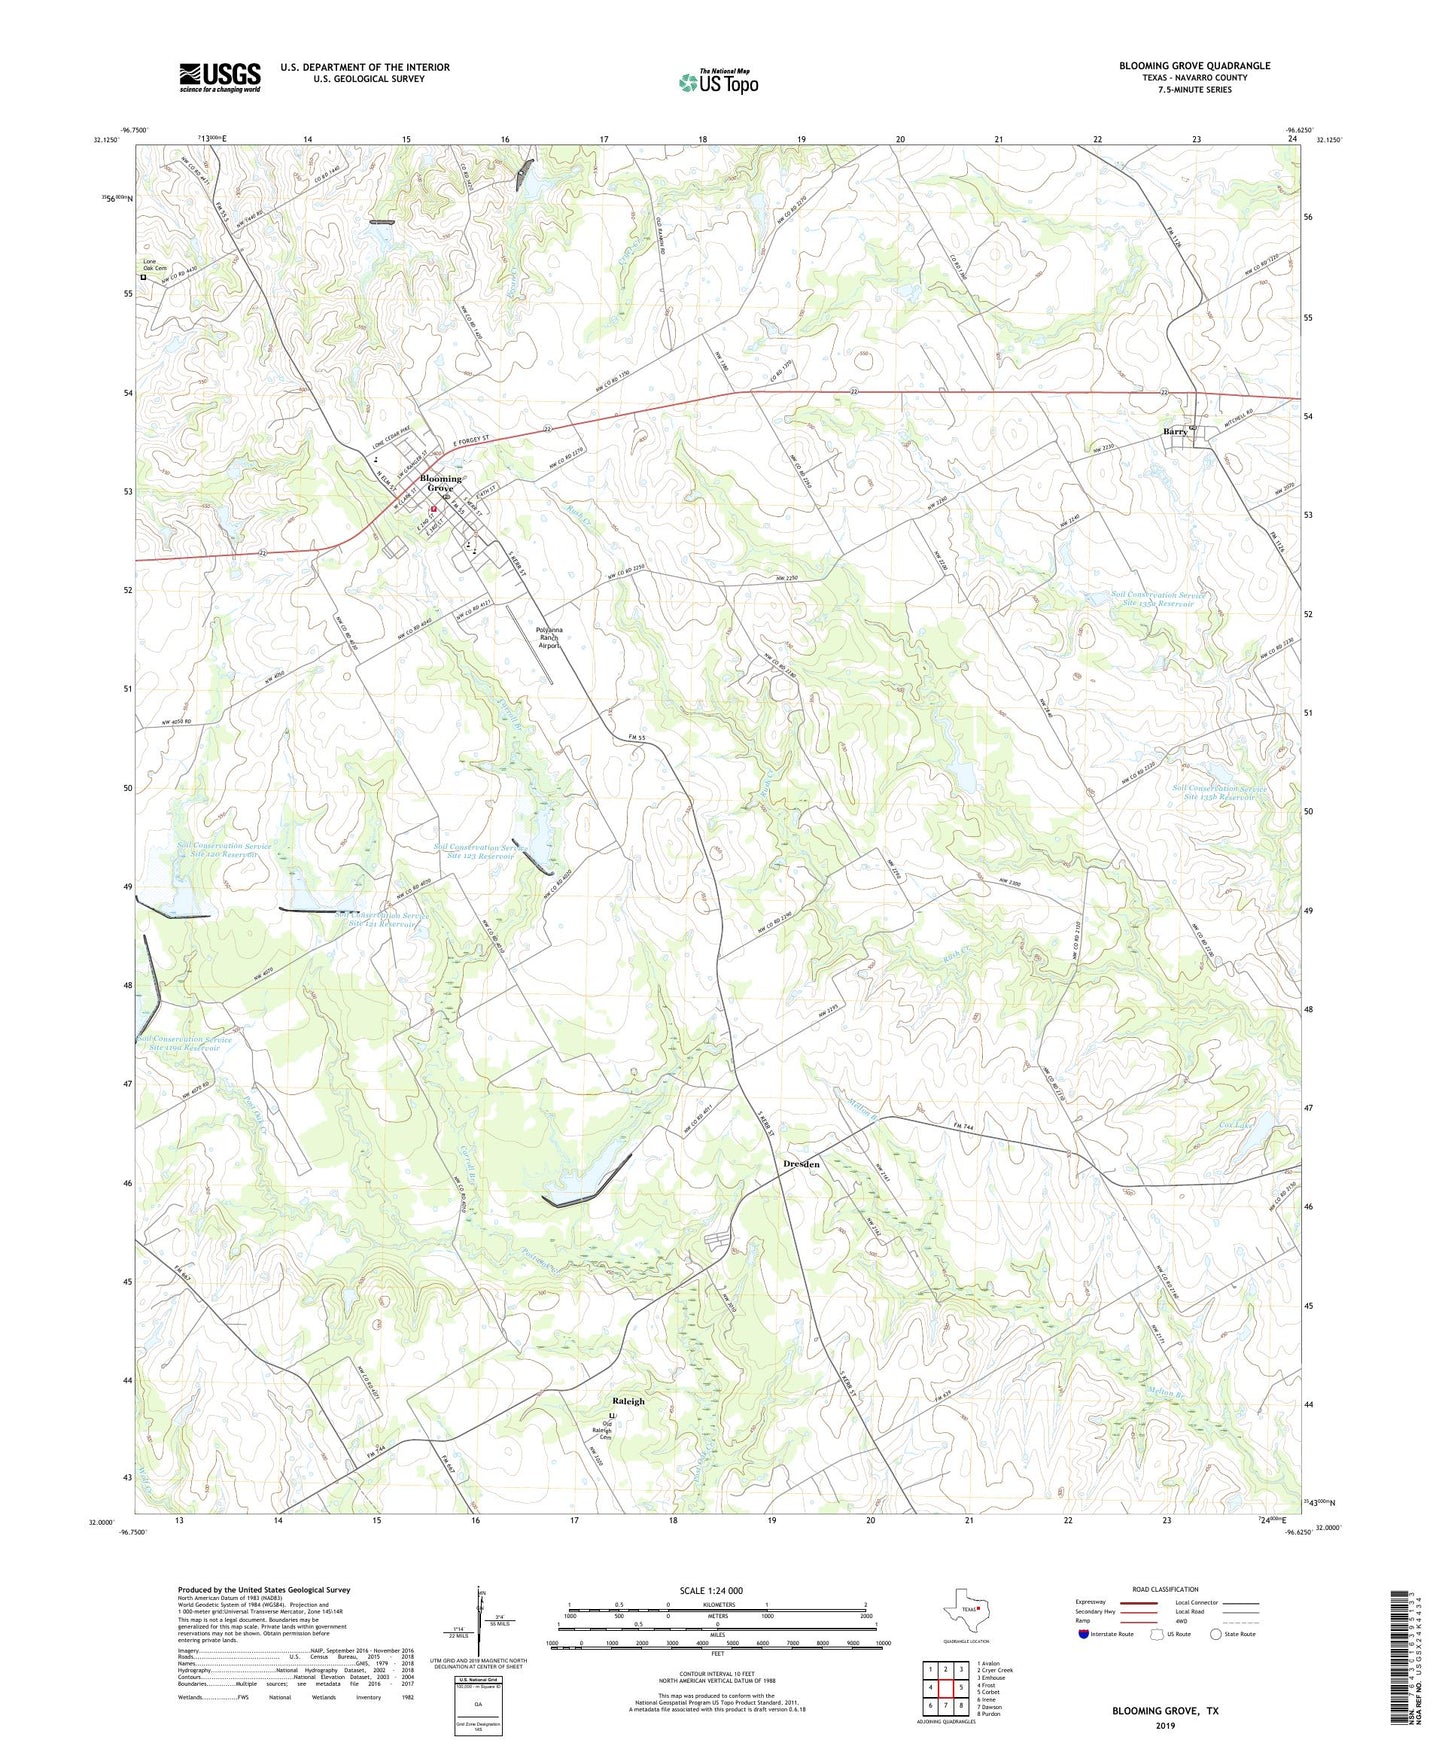 Blooming Grove Texas US Topo Map Image